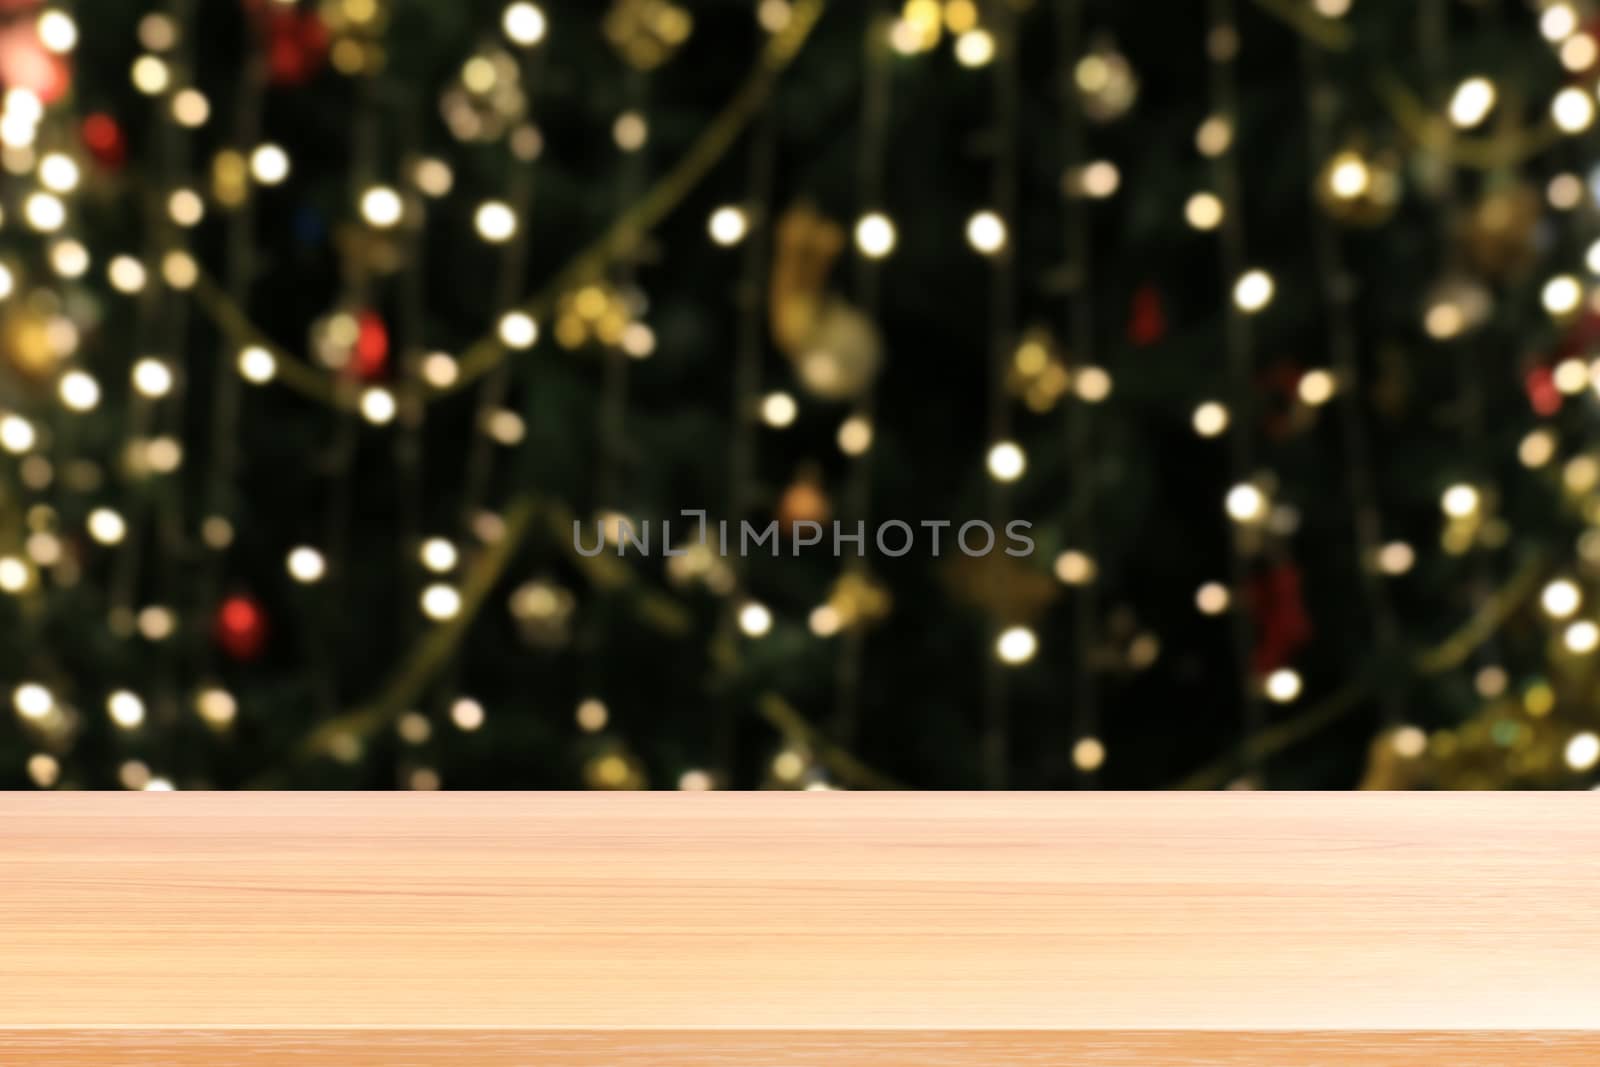 wood plank on lighting blurred christmas tree decoration background, empty wood table floors on lighting green christmas bokeh, wood table board empty front green glitter background light colorful by cgdeaw